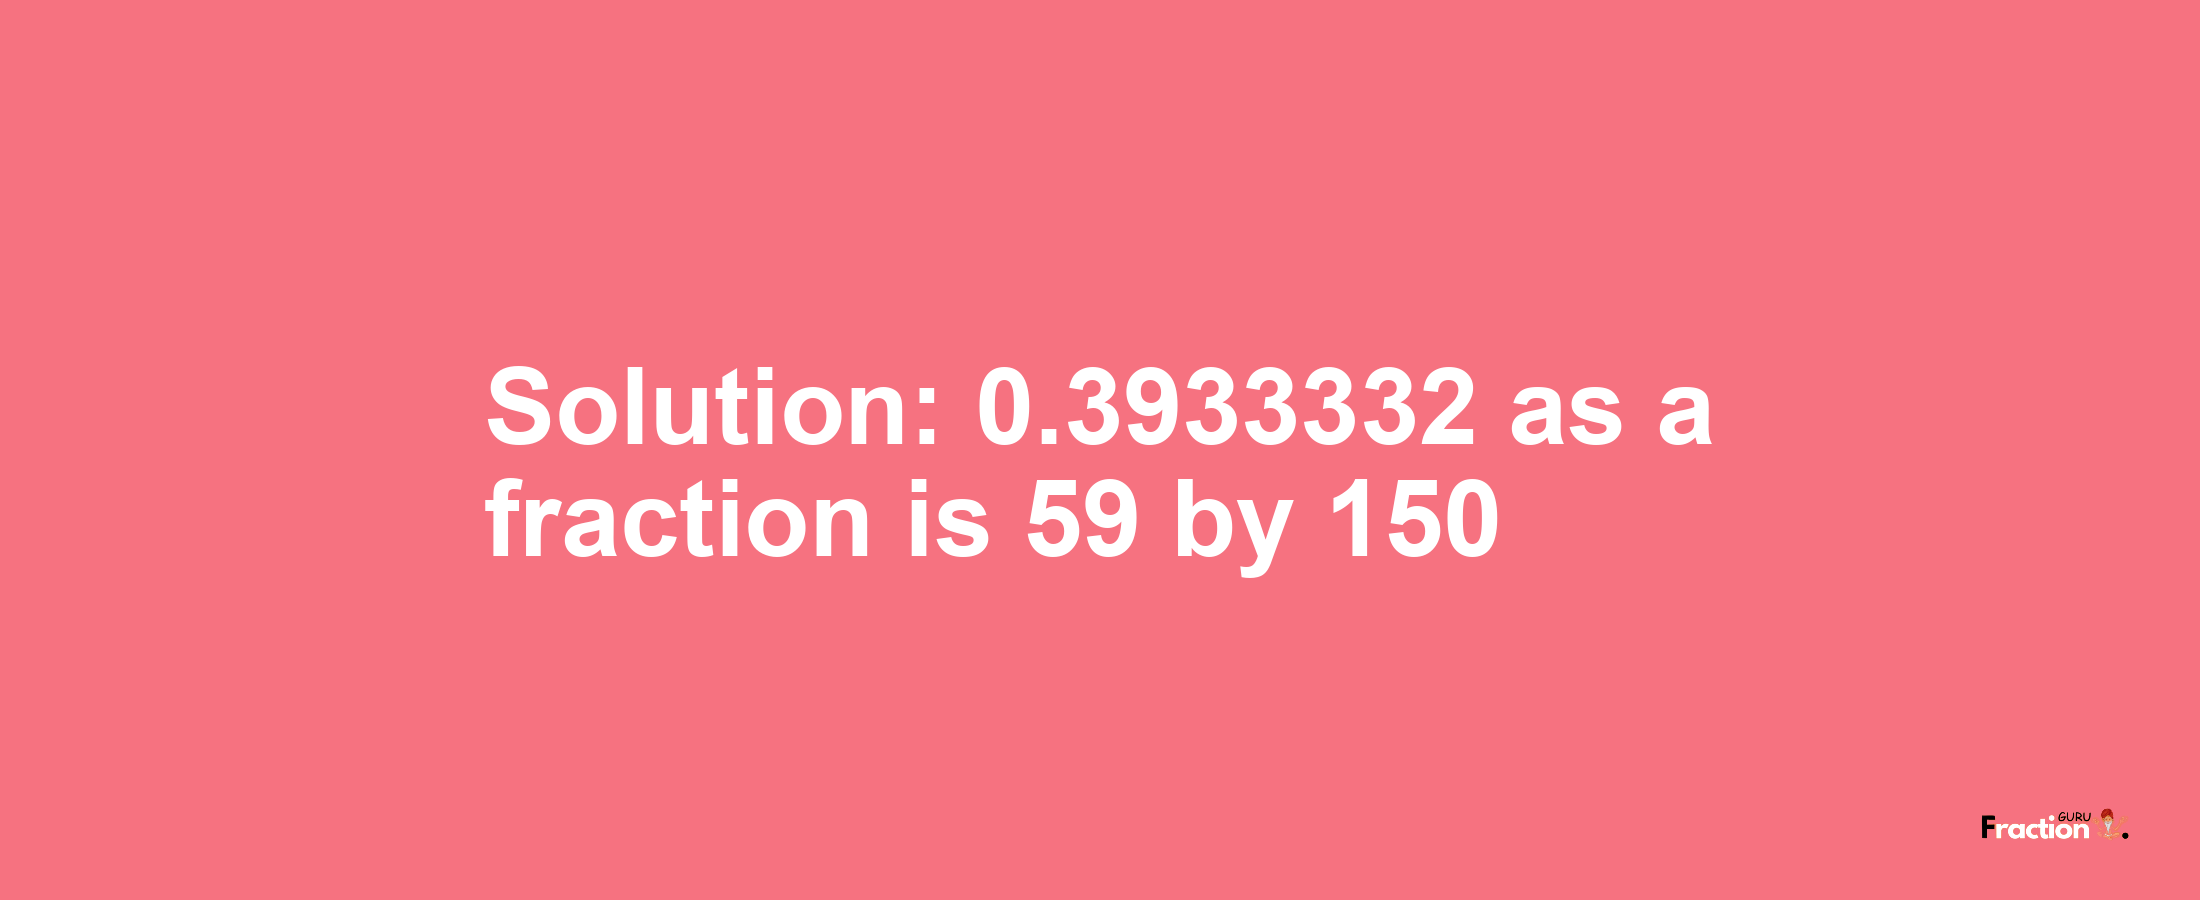 Solution:0.3933332 as a fraction is 59/150